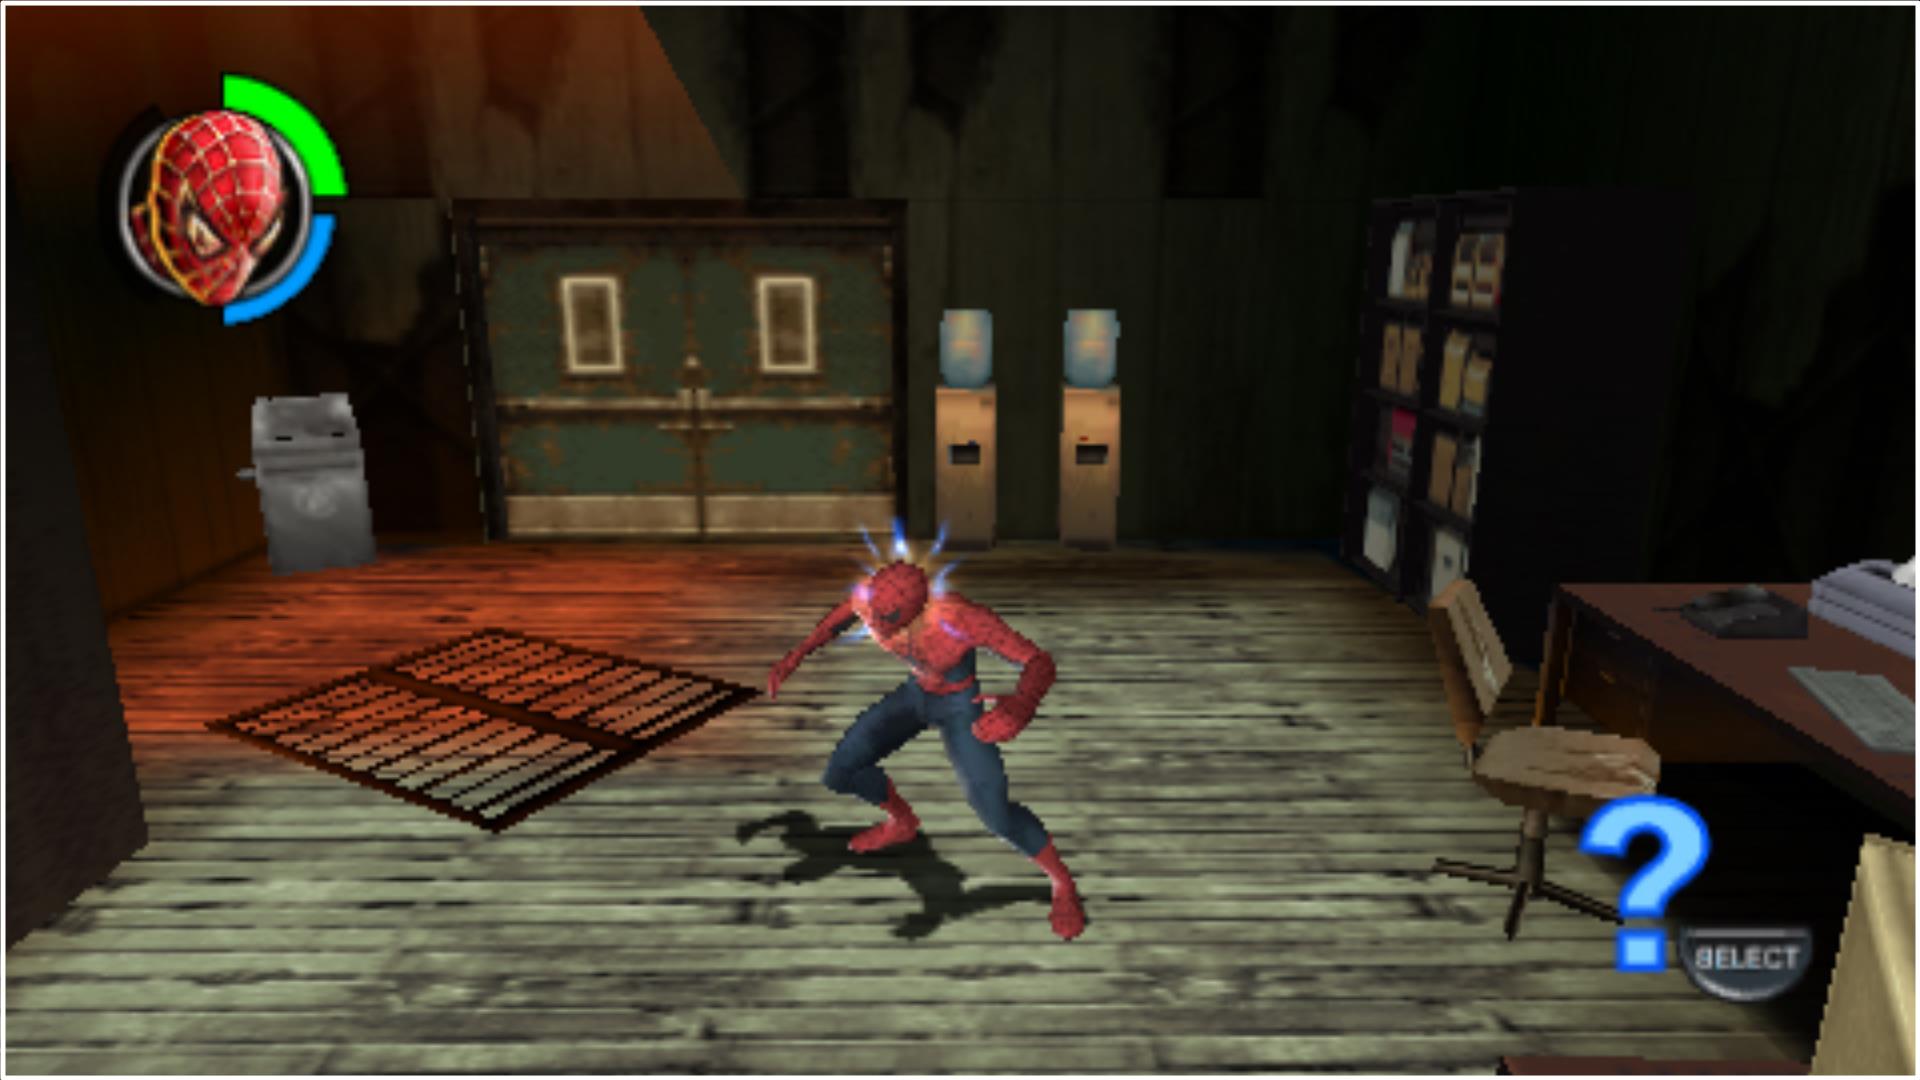 the amazing spider man 2 game highly compressed